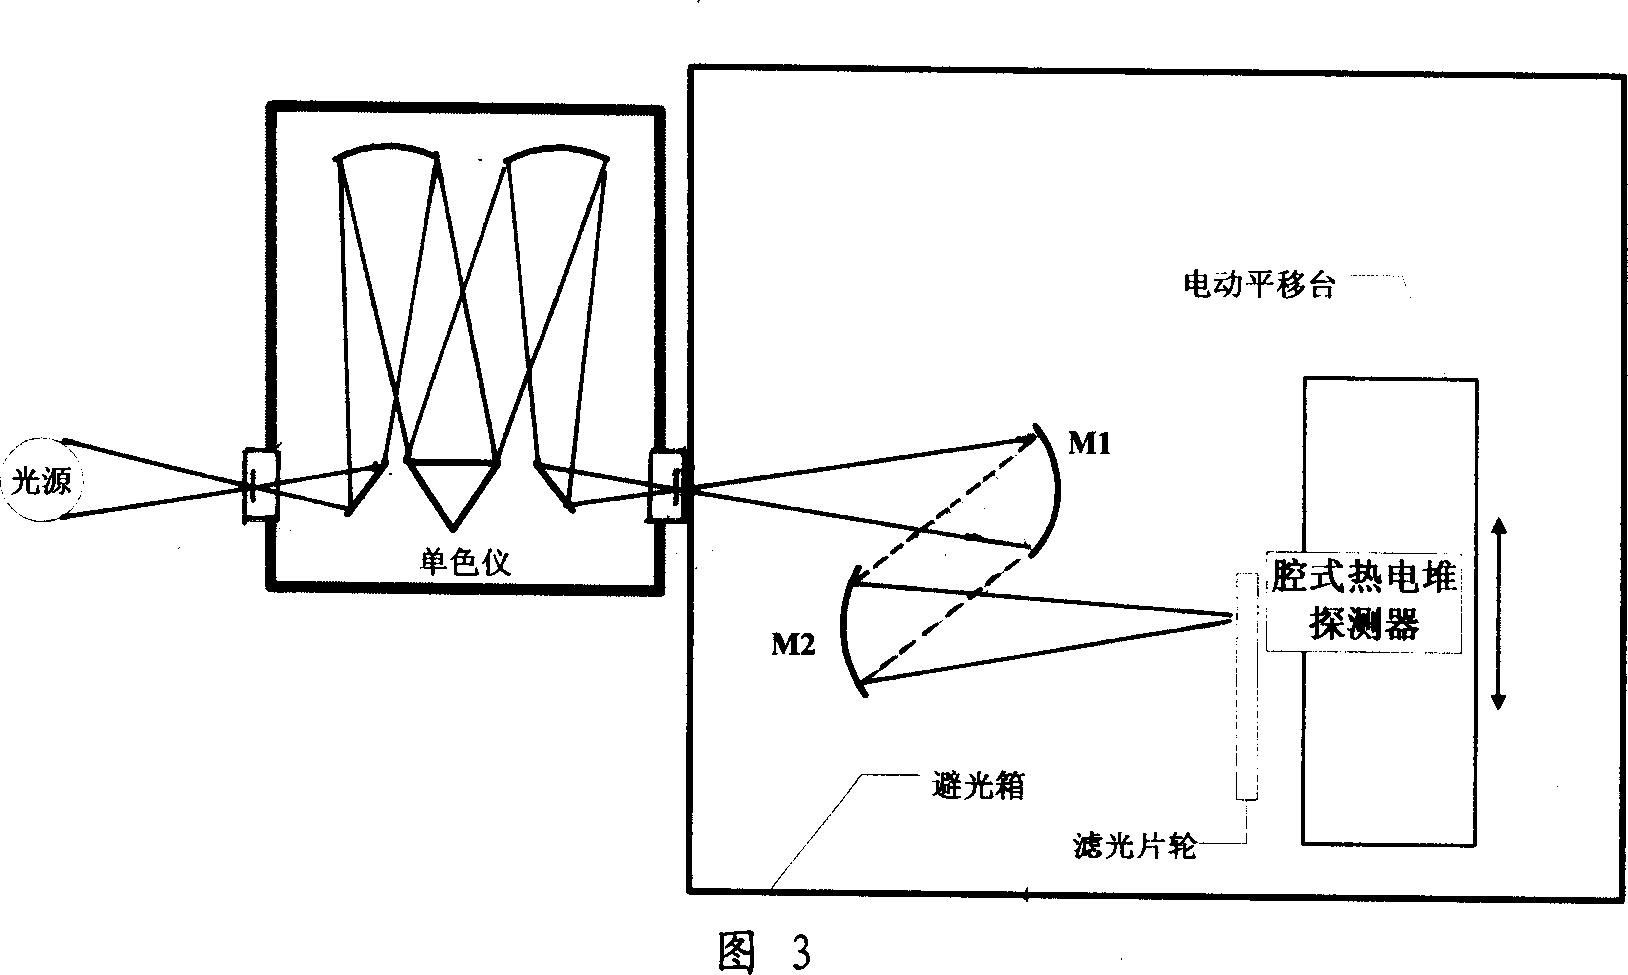 Infrared spectral radiometric calibration system